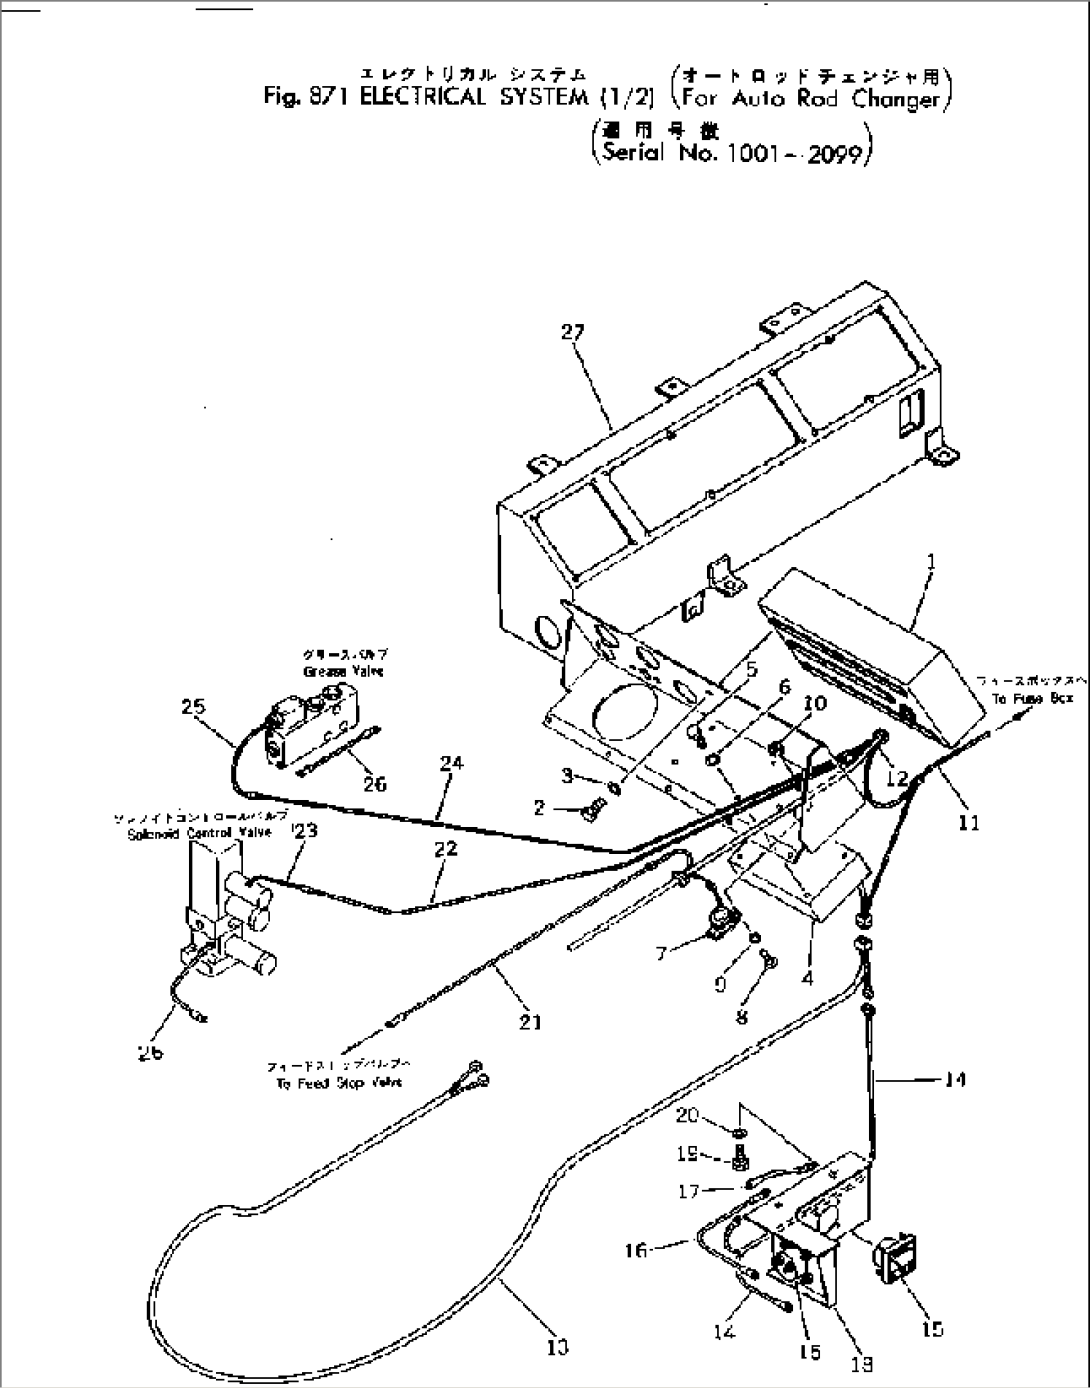 ELECTRICAL SYSTEM (1/2)(FOR AUTO ROD CHANGER)(#1001-2099)